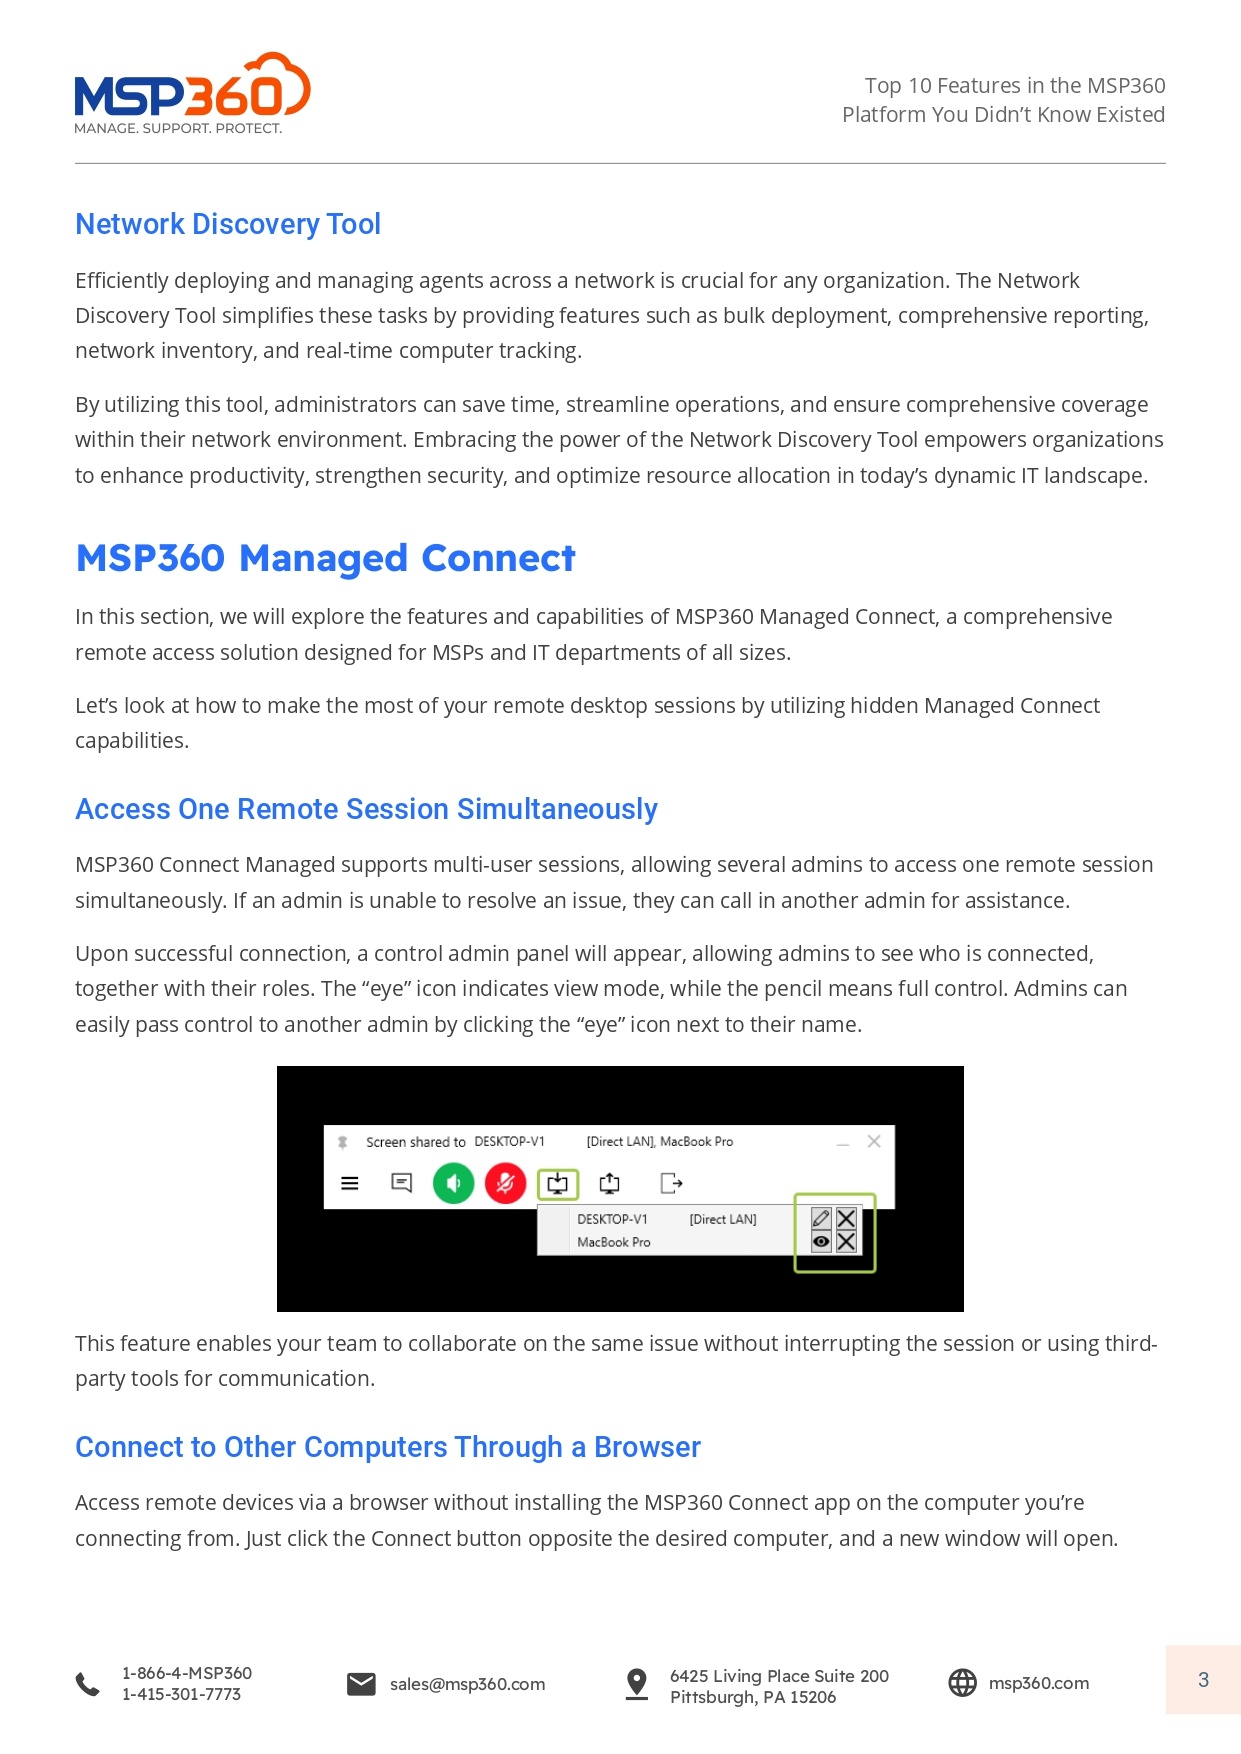 Top 10 Features in the MSP360 Platform You Didn’t Know Existed_page-0003